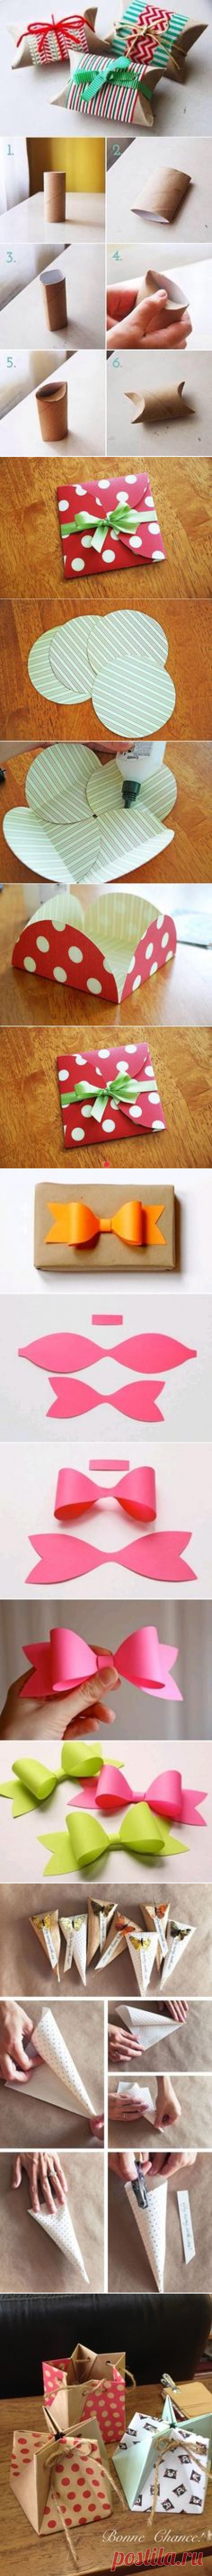 (153) 40 Amazing Christmas Gift Wrapping Ideas You can Make Yourself